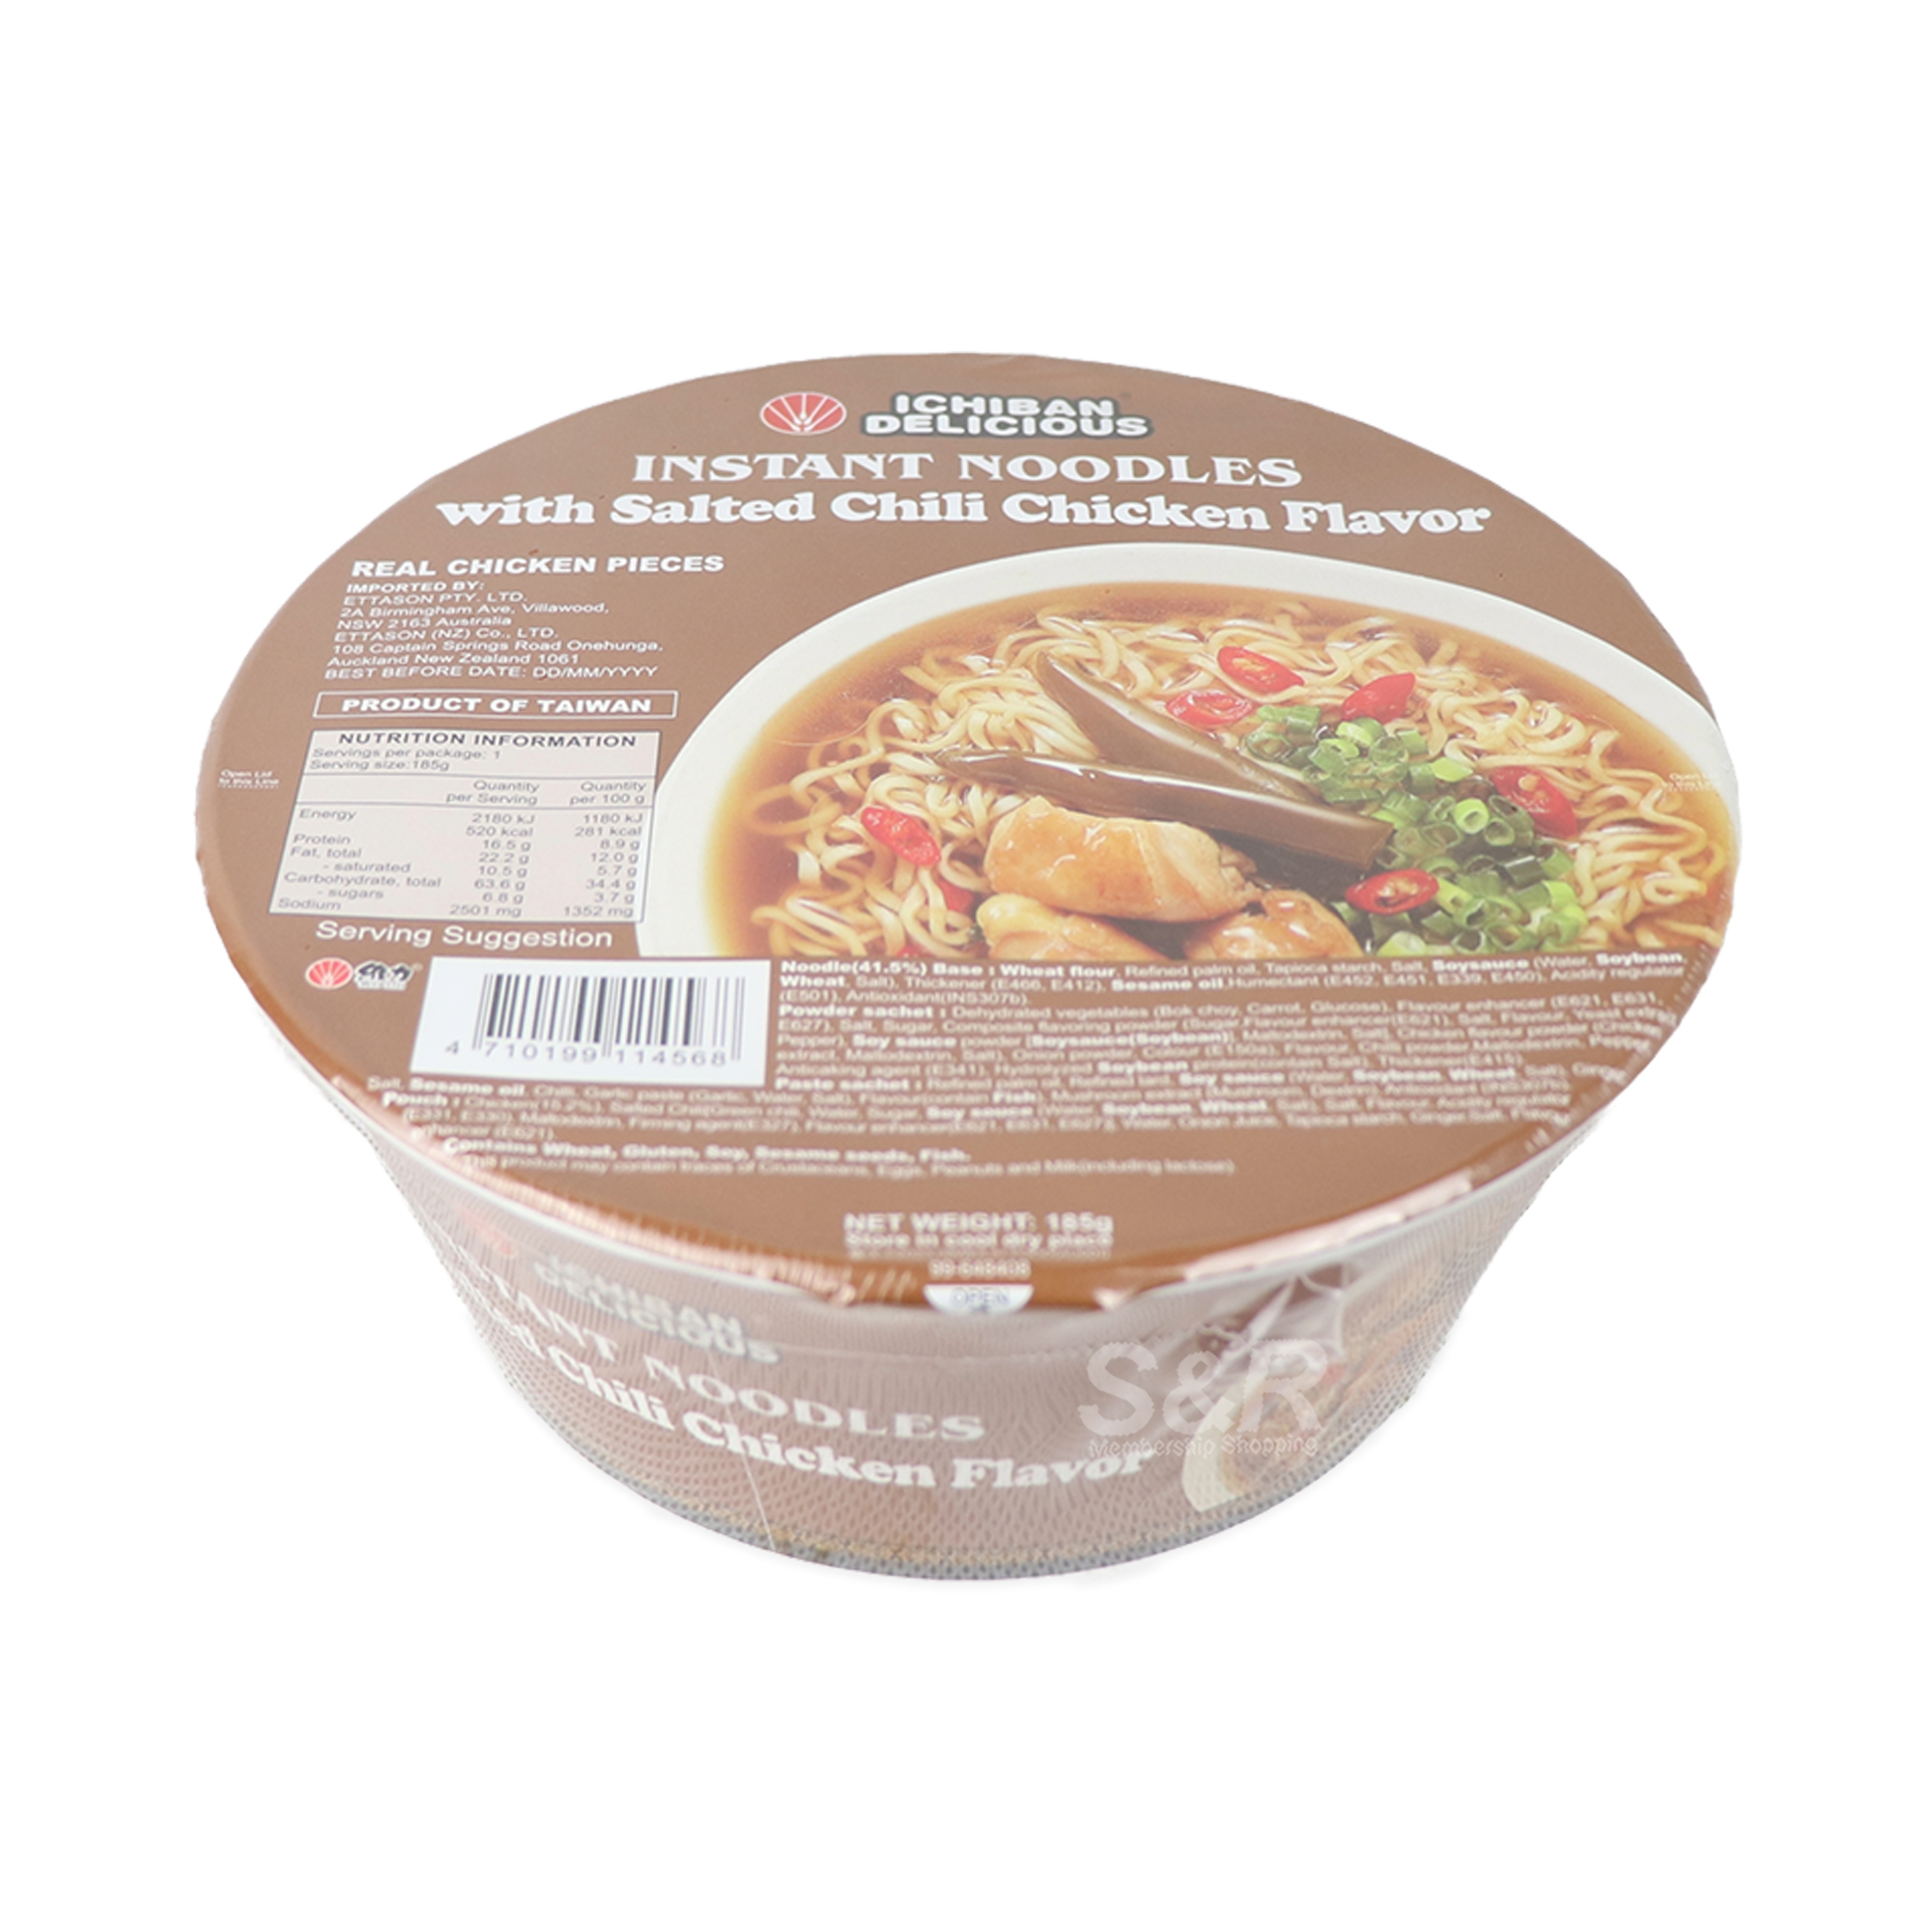 Ichiban Delicious Instant Noodles with Salted Chili Chicken Flavor 185g